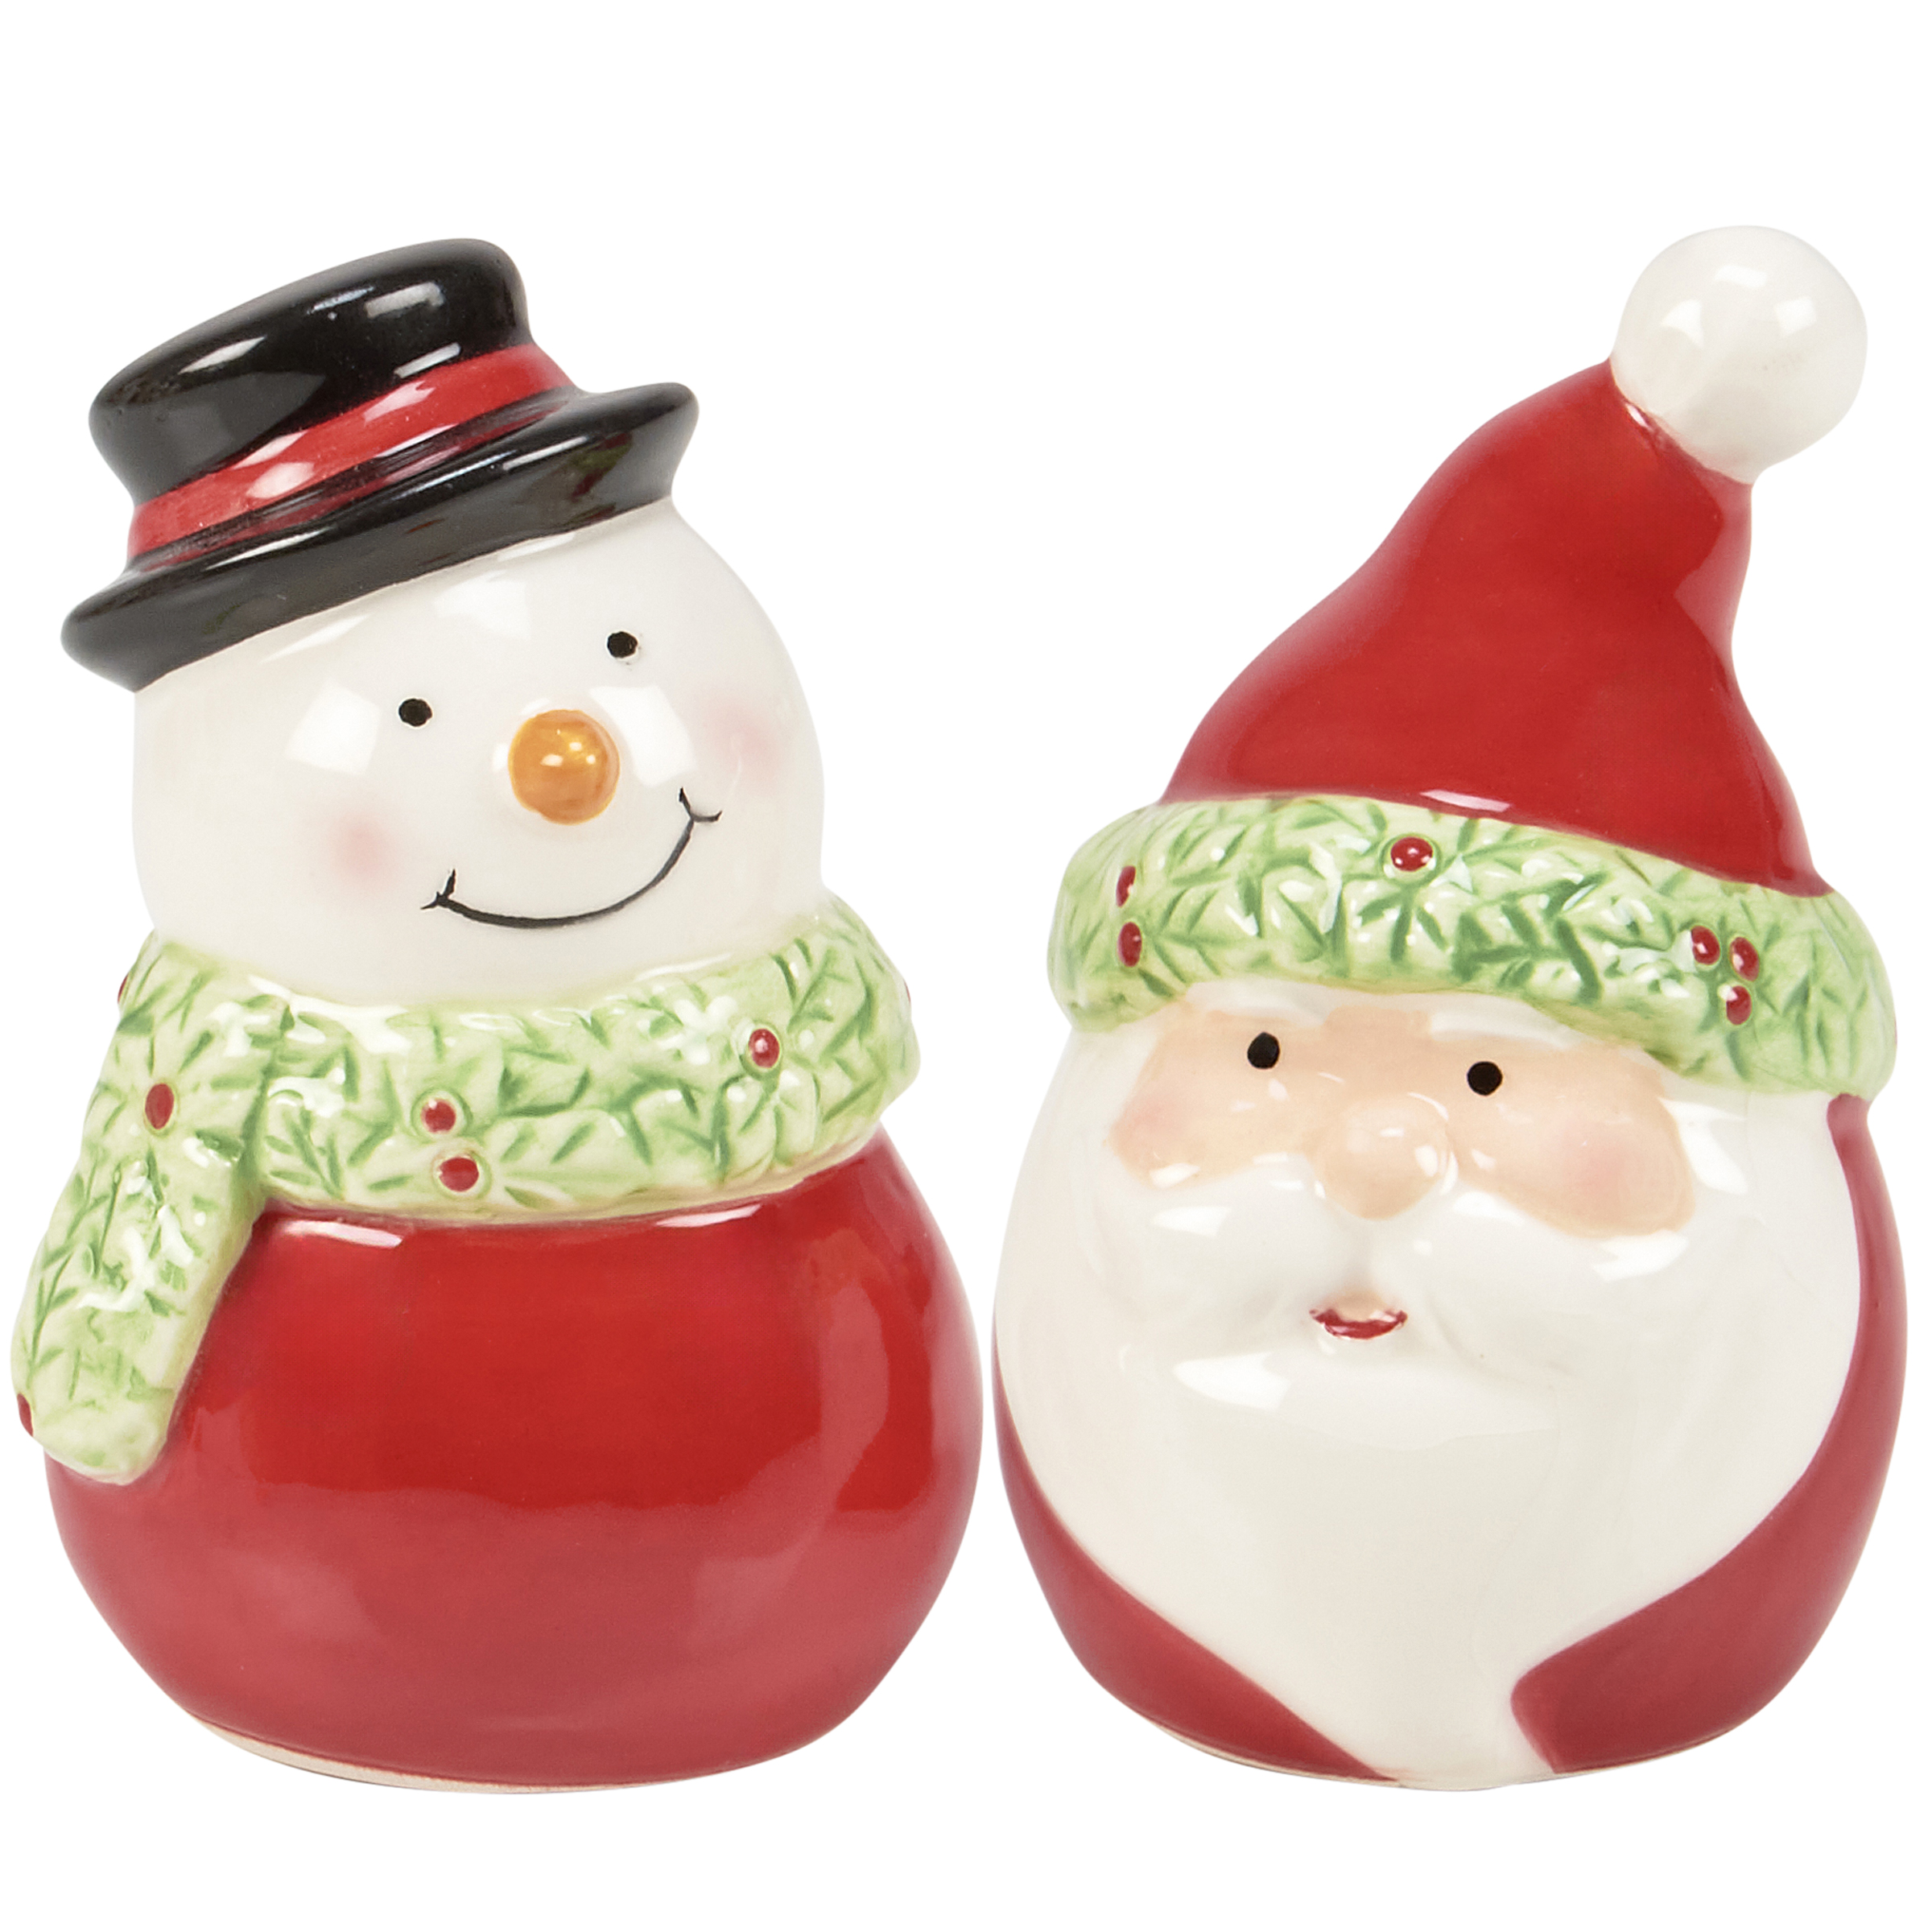 Christmas Friends Salt And Pepper Shakers | Primitives By Kathy